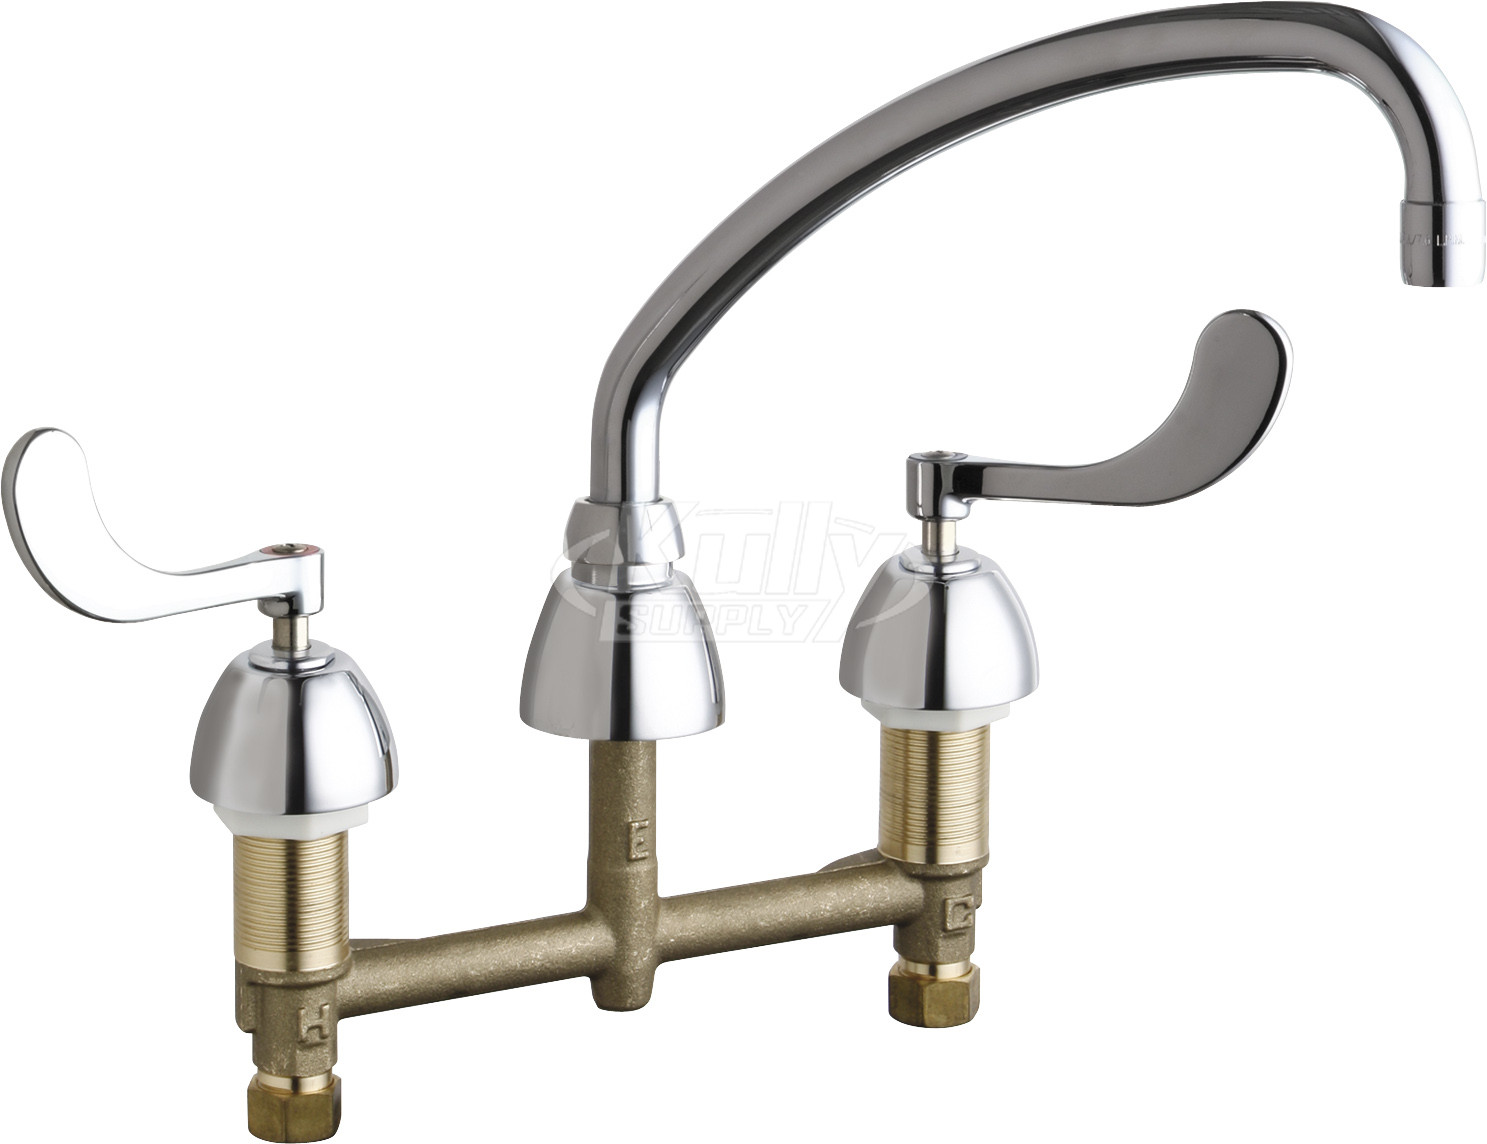 Chicago 201-AE35-317ABCP Concealed Hot and Cold Water Sink Faucet